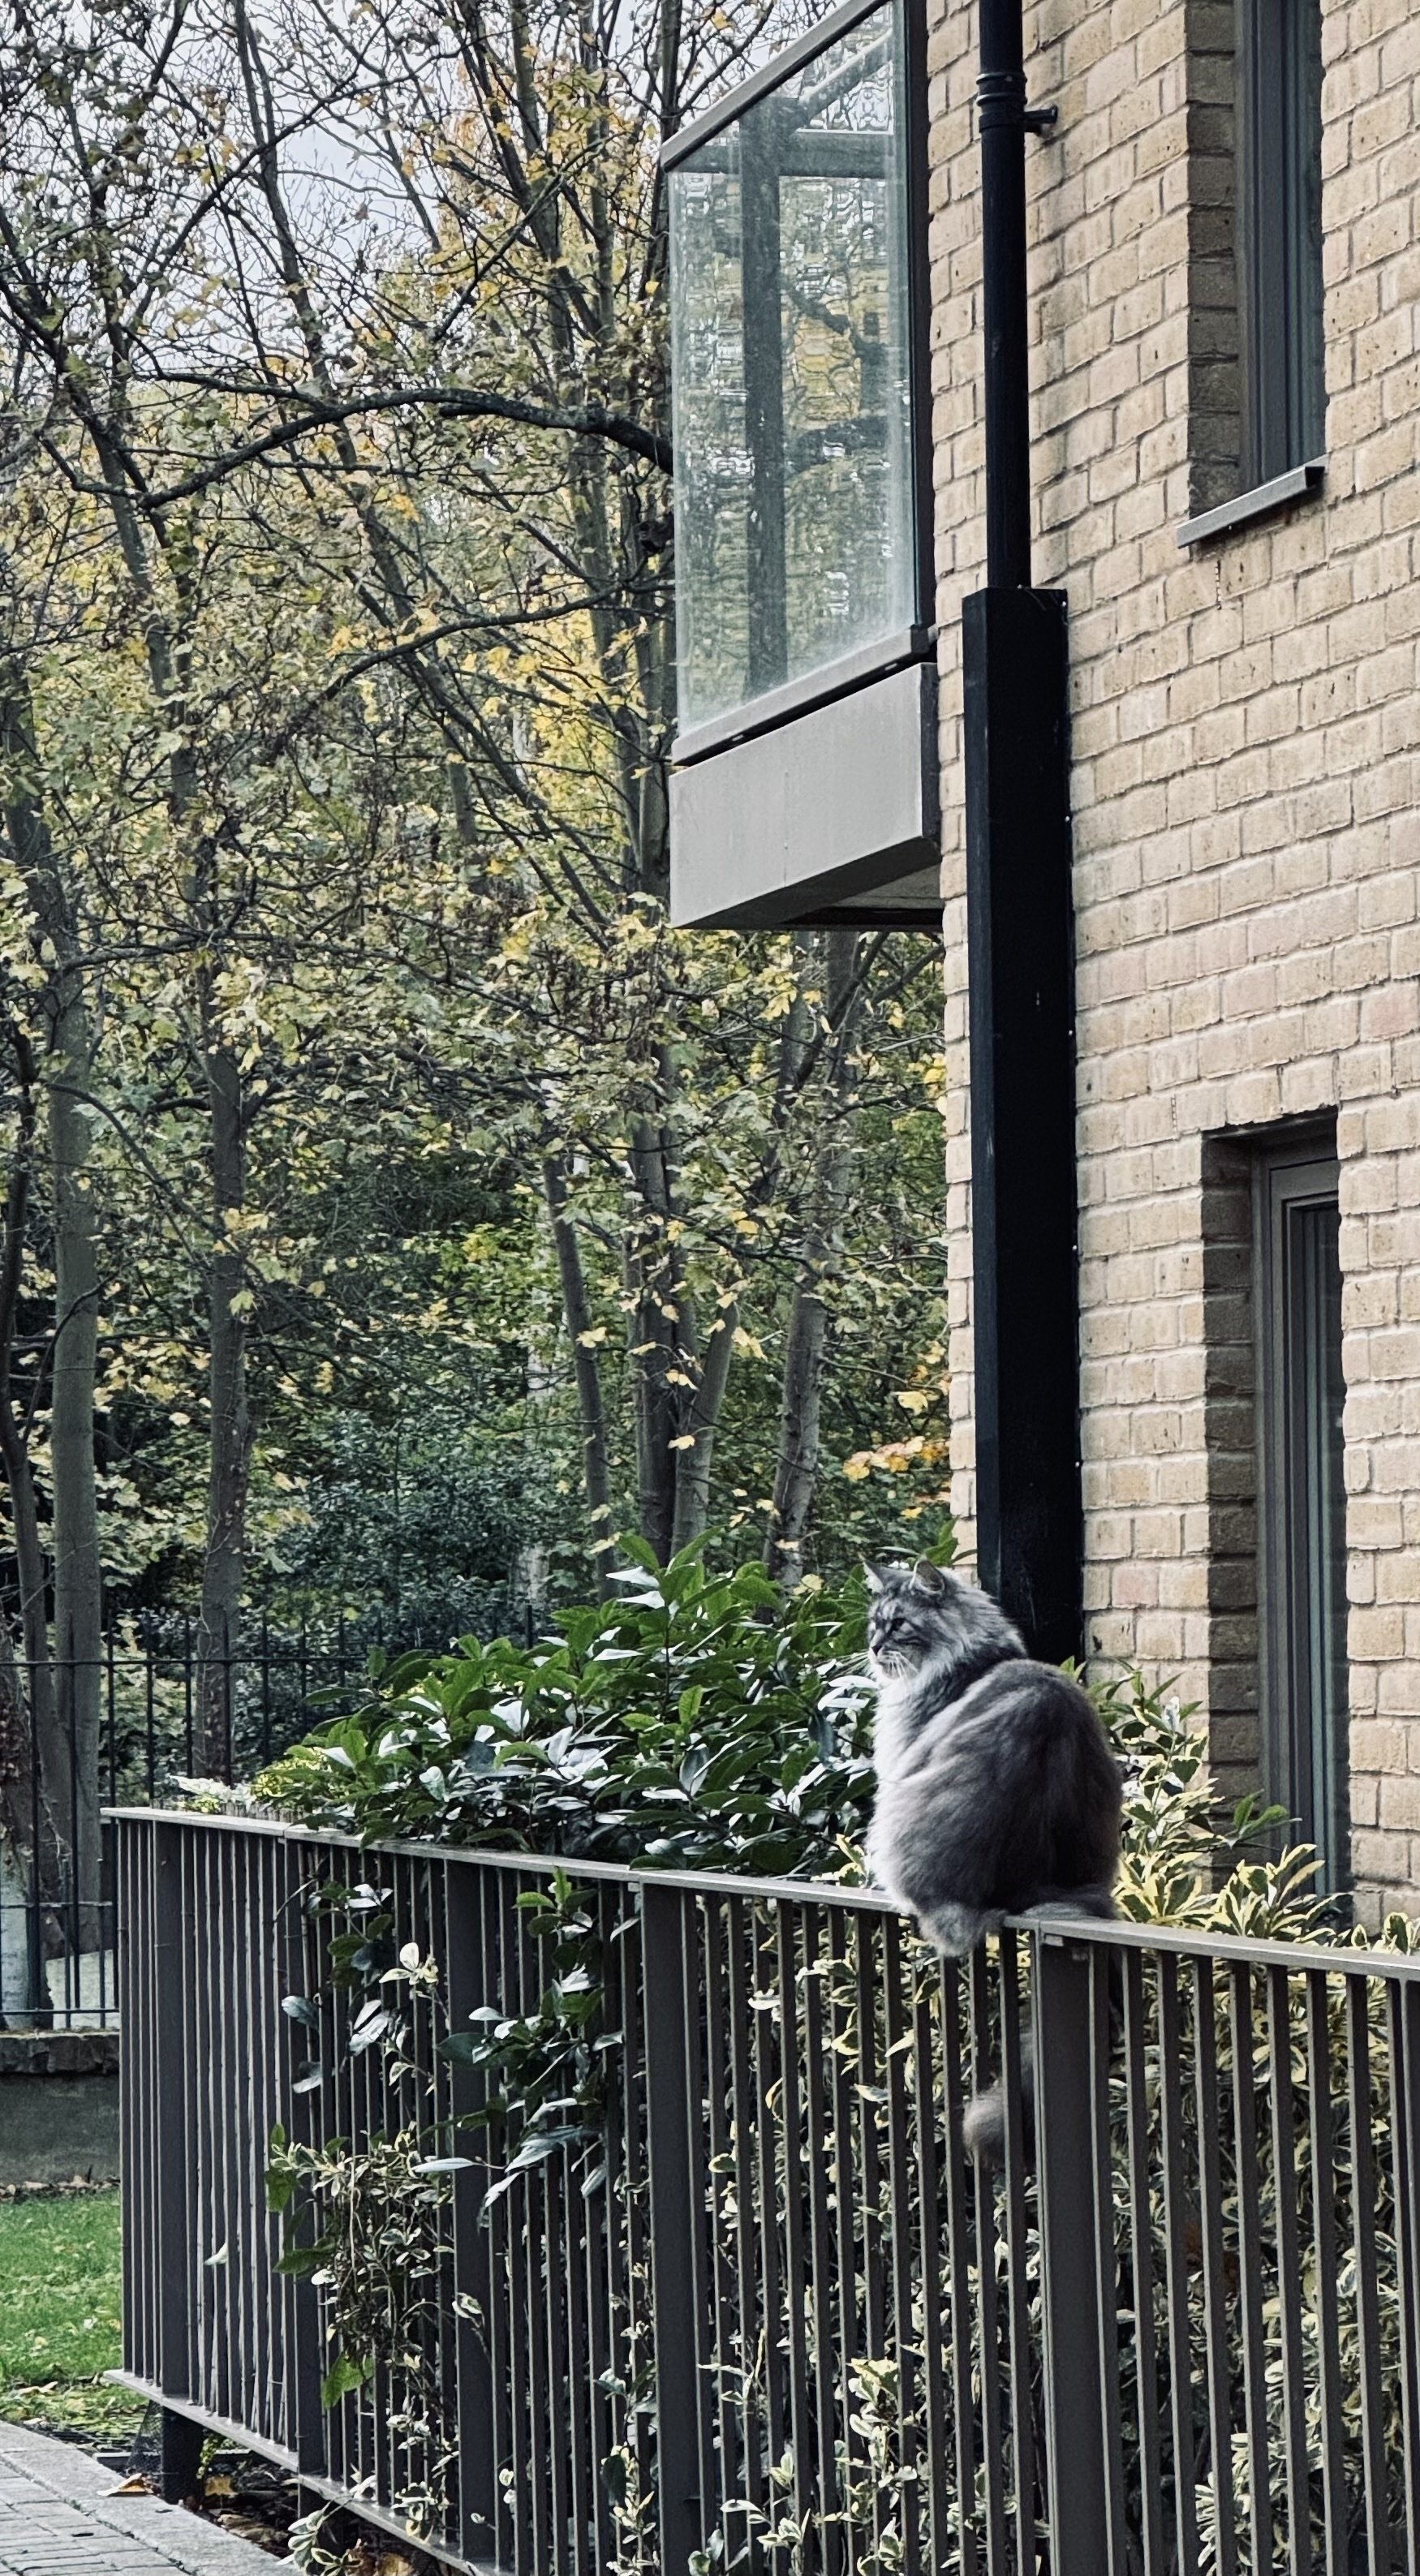 A fluffy grey cat sat on a fence outside a block of flats.